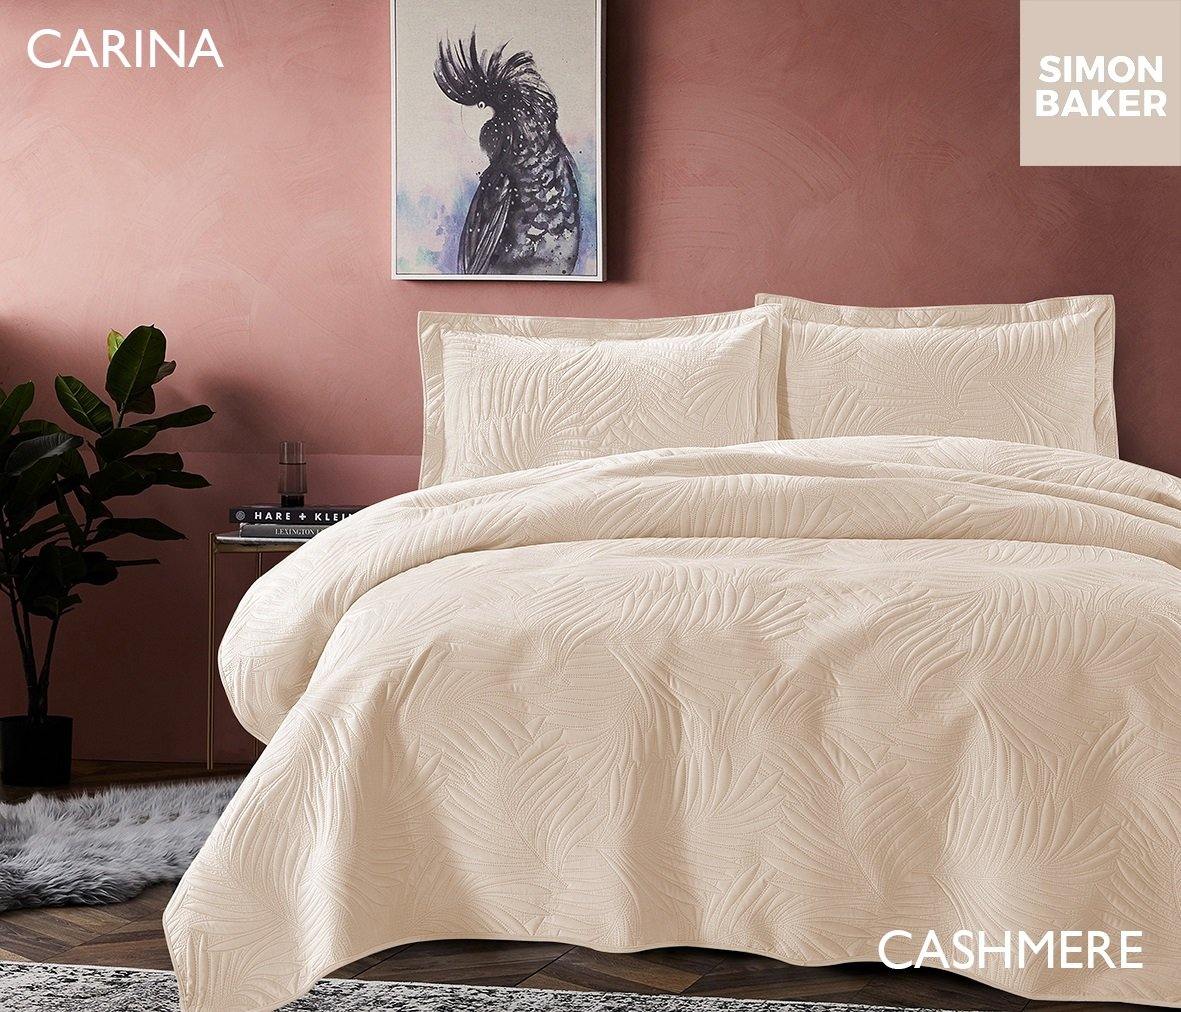 Simon Baker | Carina Quilted Bedspread Cashmere (Various Sizes)